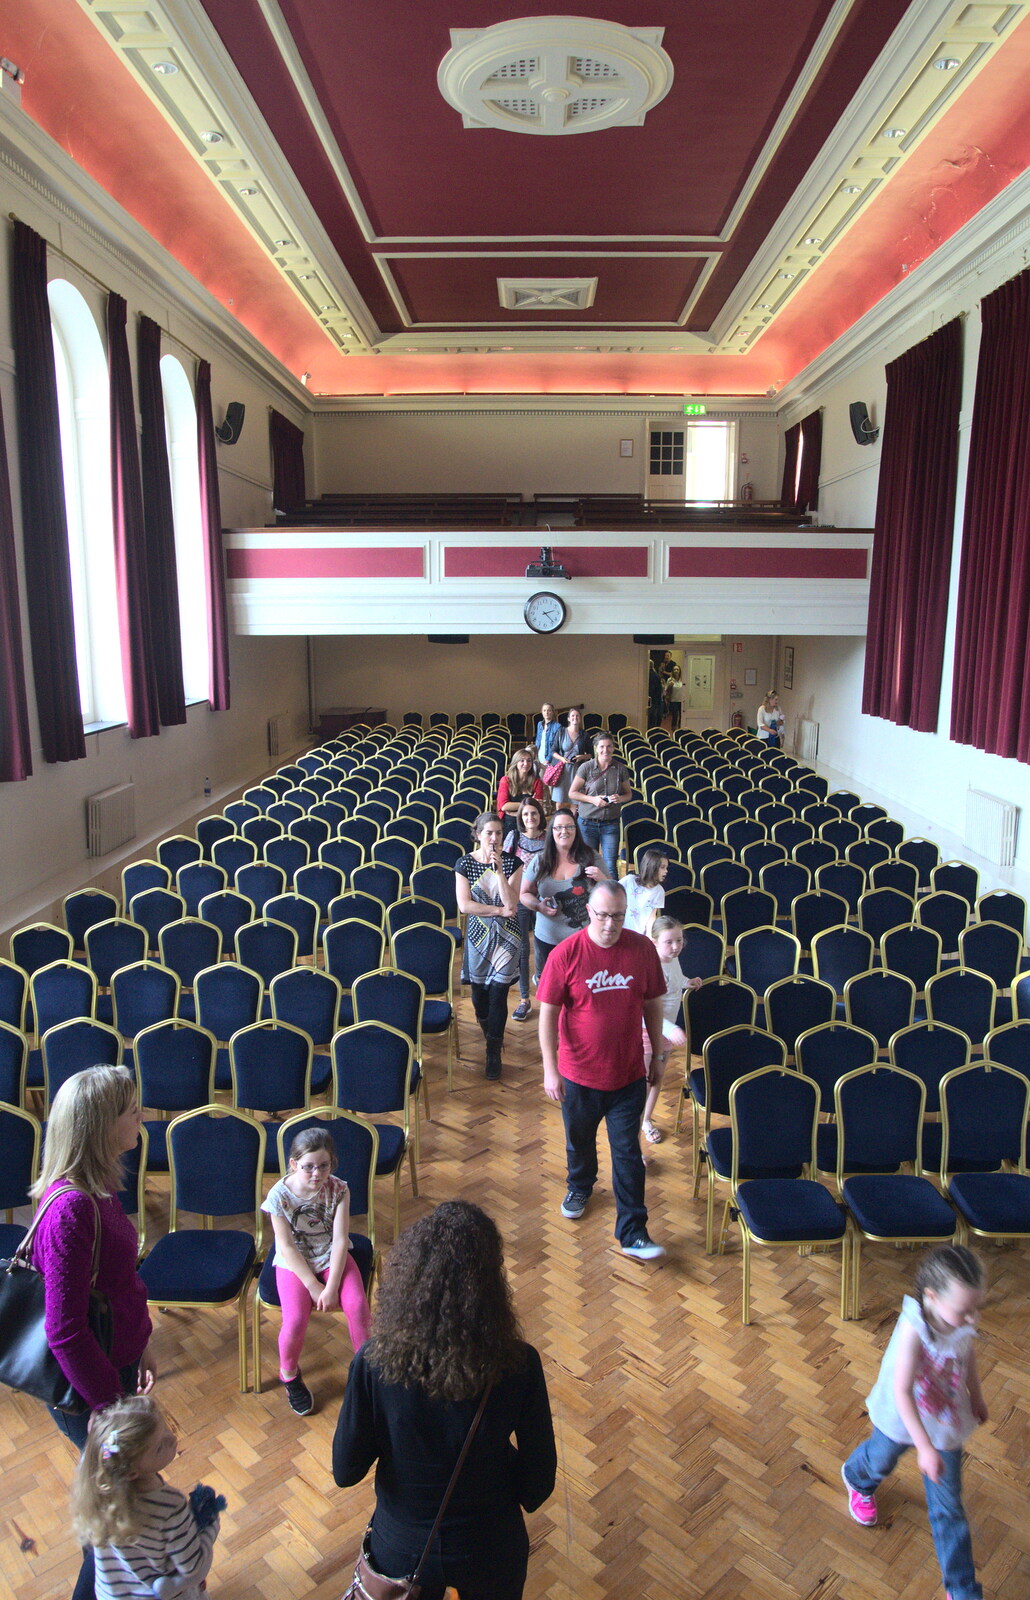 Visitors file in to the hall from Sion Hill and Blackrock for the Day, Dublin, Ireland - 17th September 2016